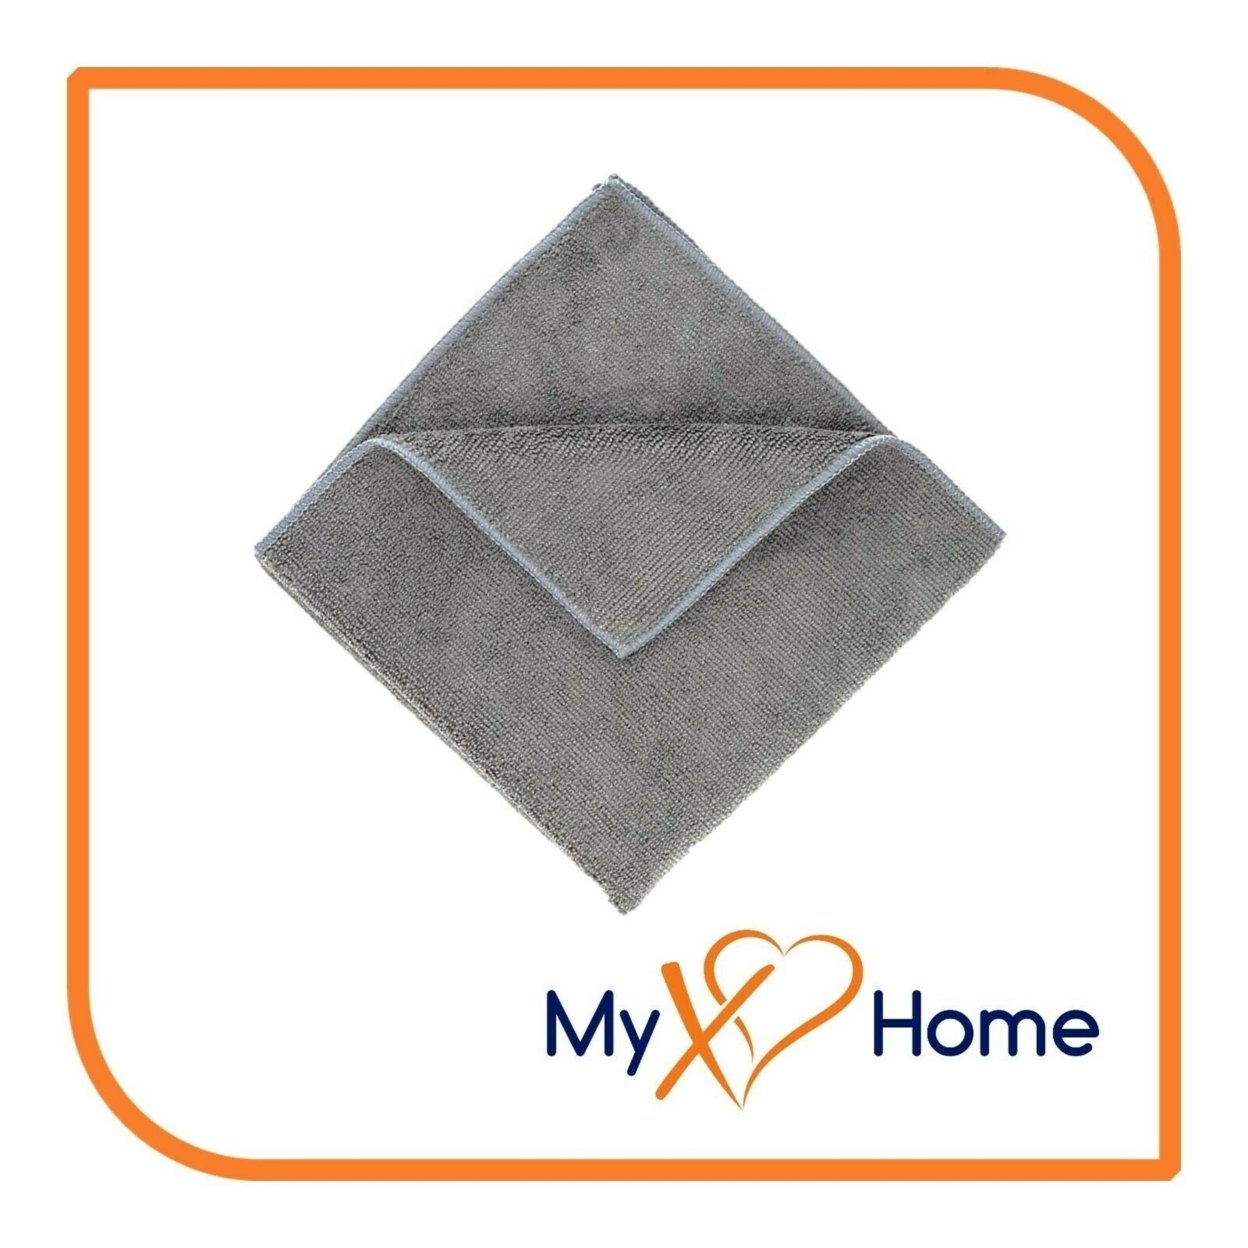 12 x 12 Gray Microfiber Towel by MyXOHome - h) 48 Towels, XOH-CLE-TOW-MIC-1250x48